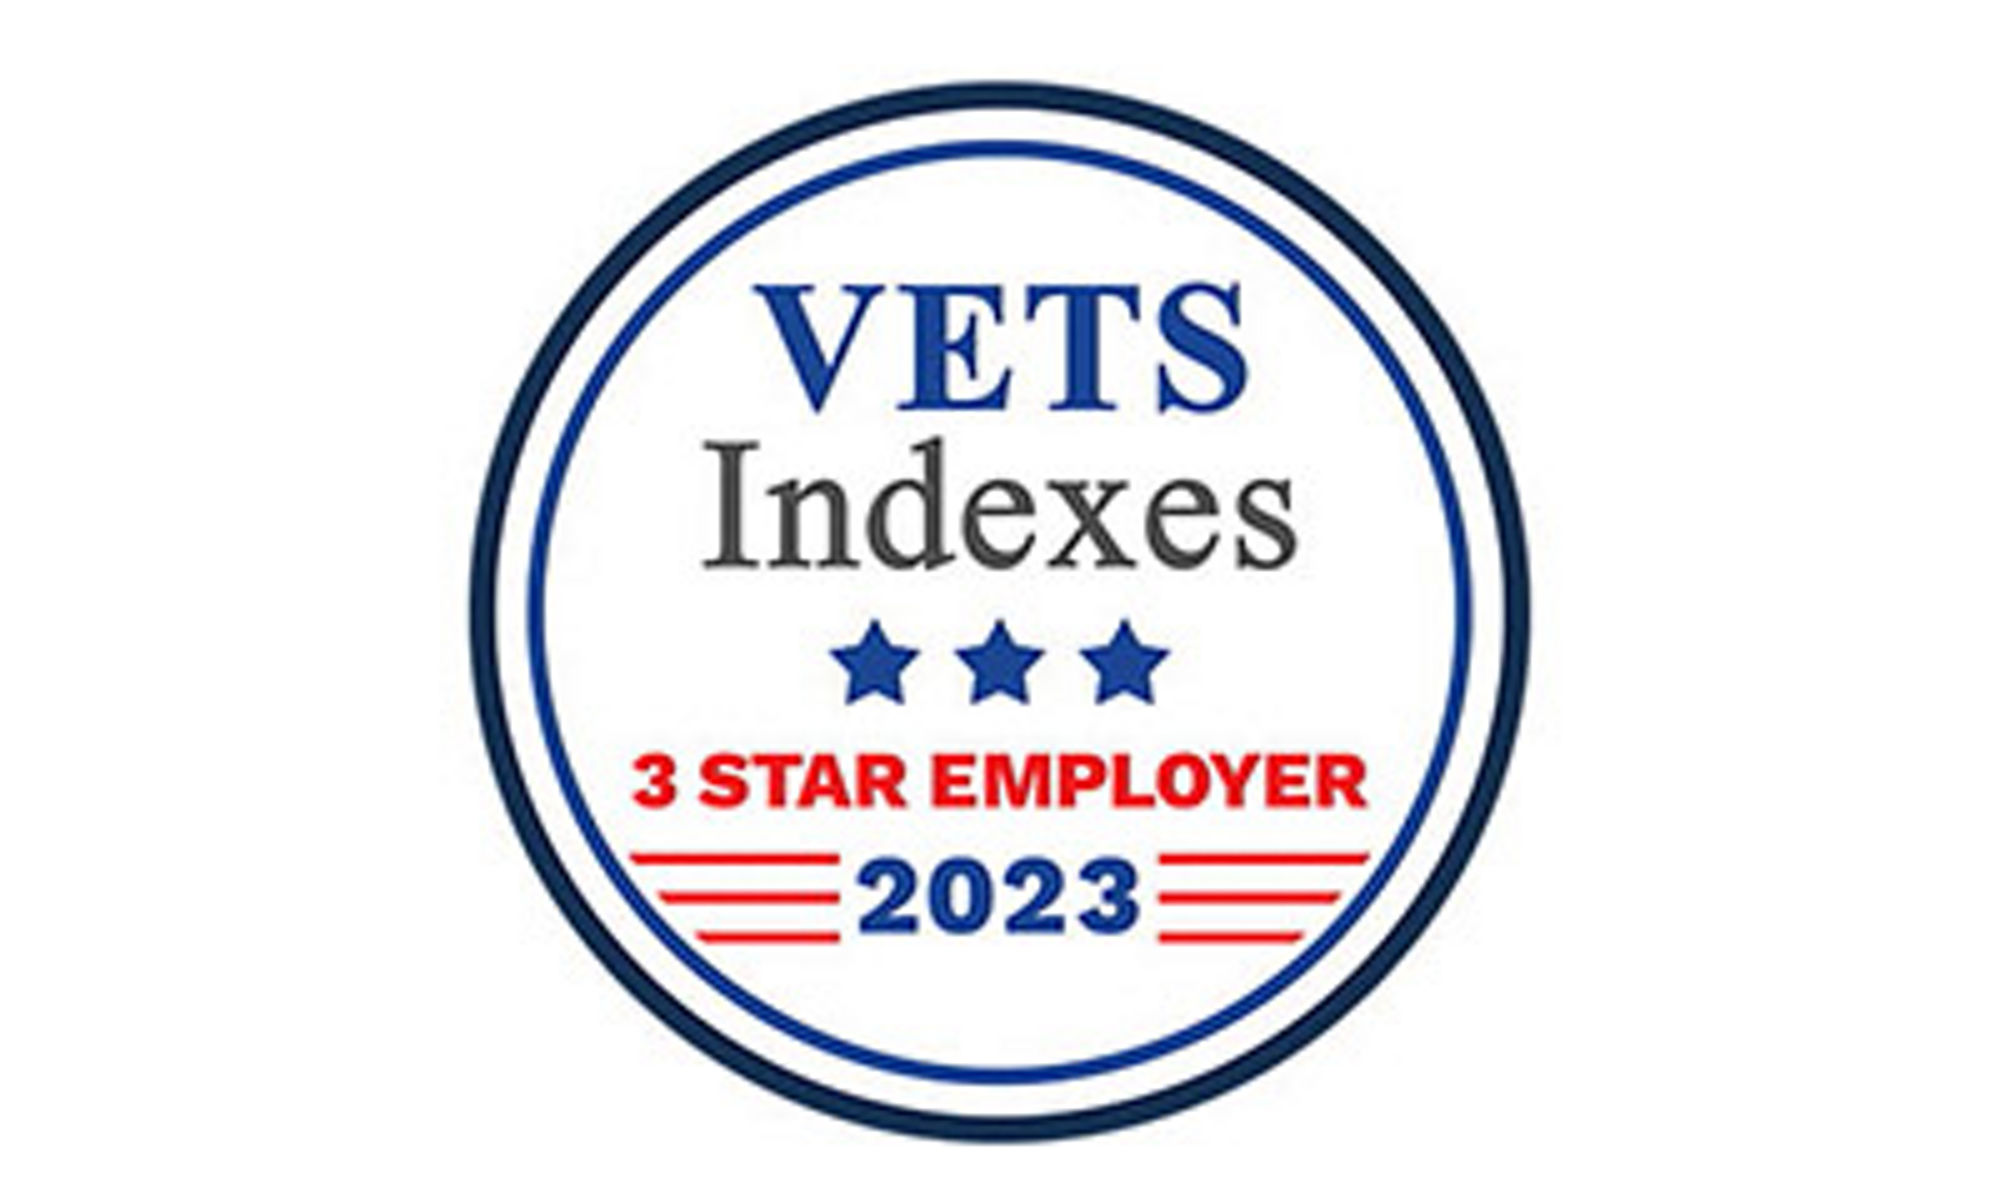 VETS Indexes 3-Star Employer logo